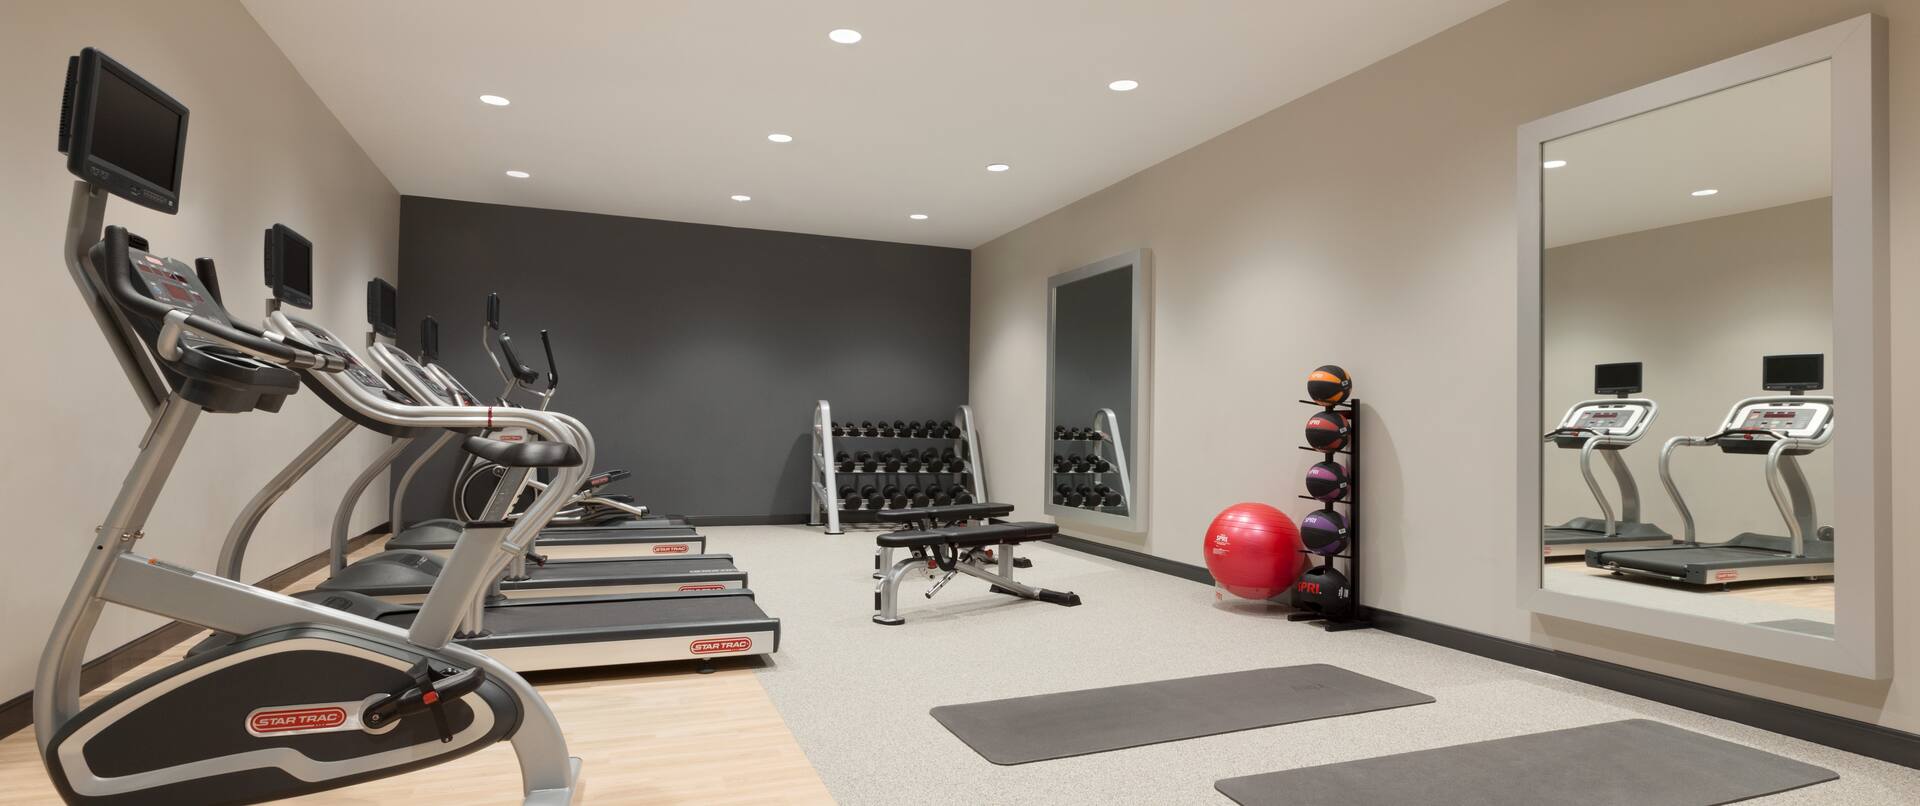 Fitness Center with Treadmills, Cycle Machine, Dumbbell Rack, Weight Bench, Gym Ball and Medicine Ball Rack